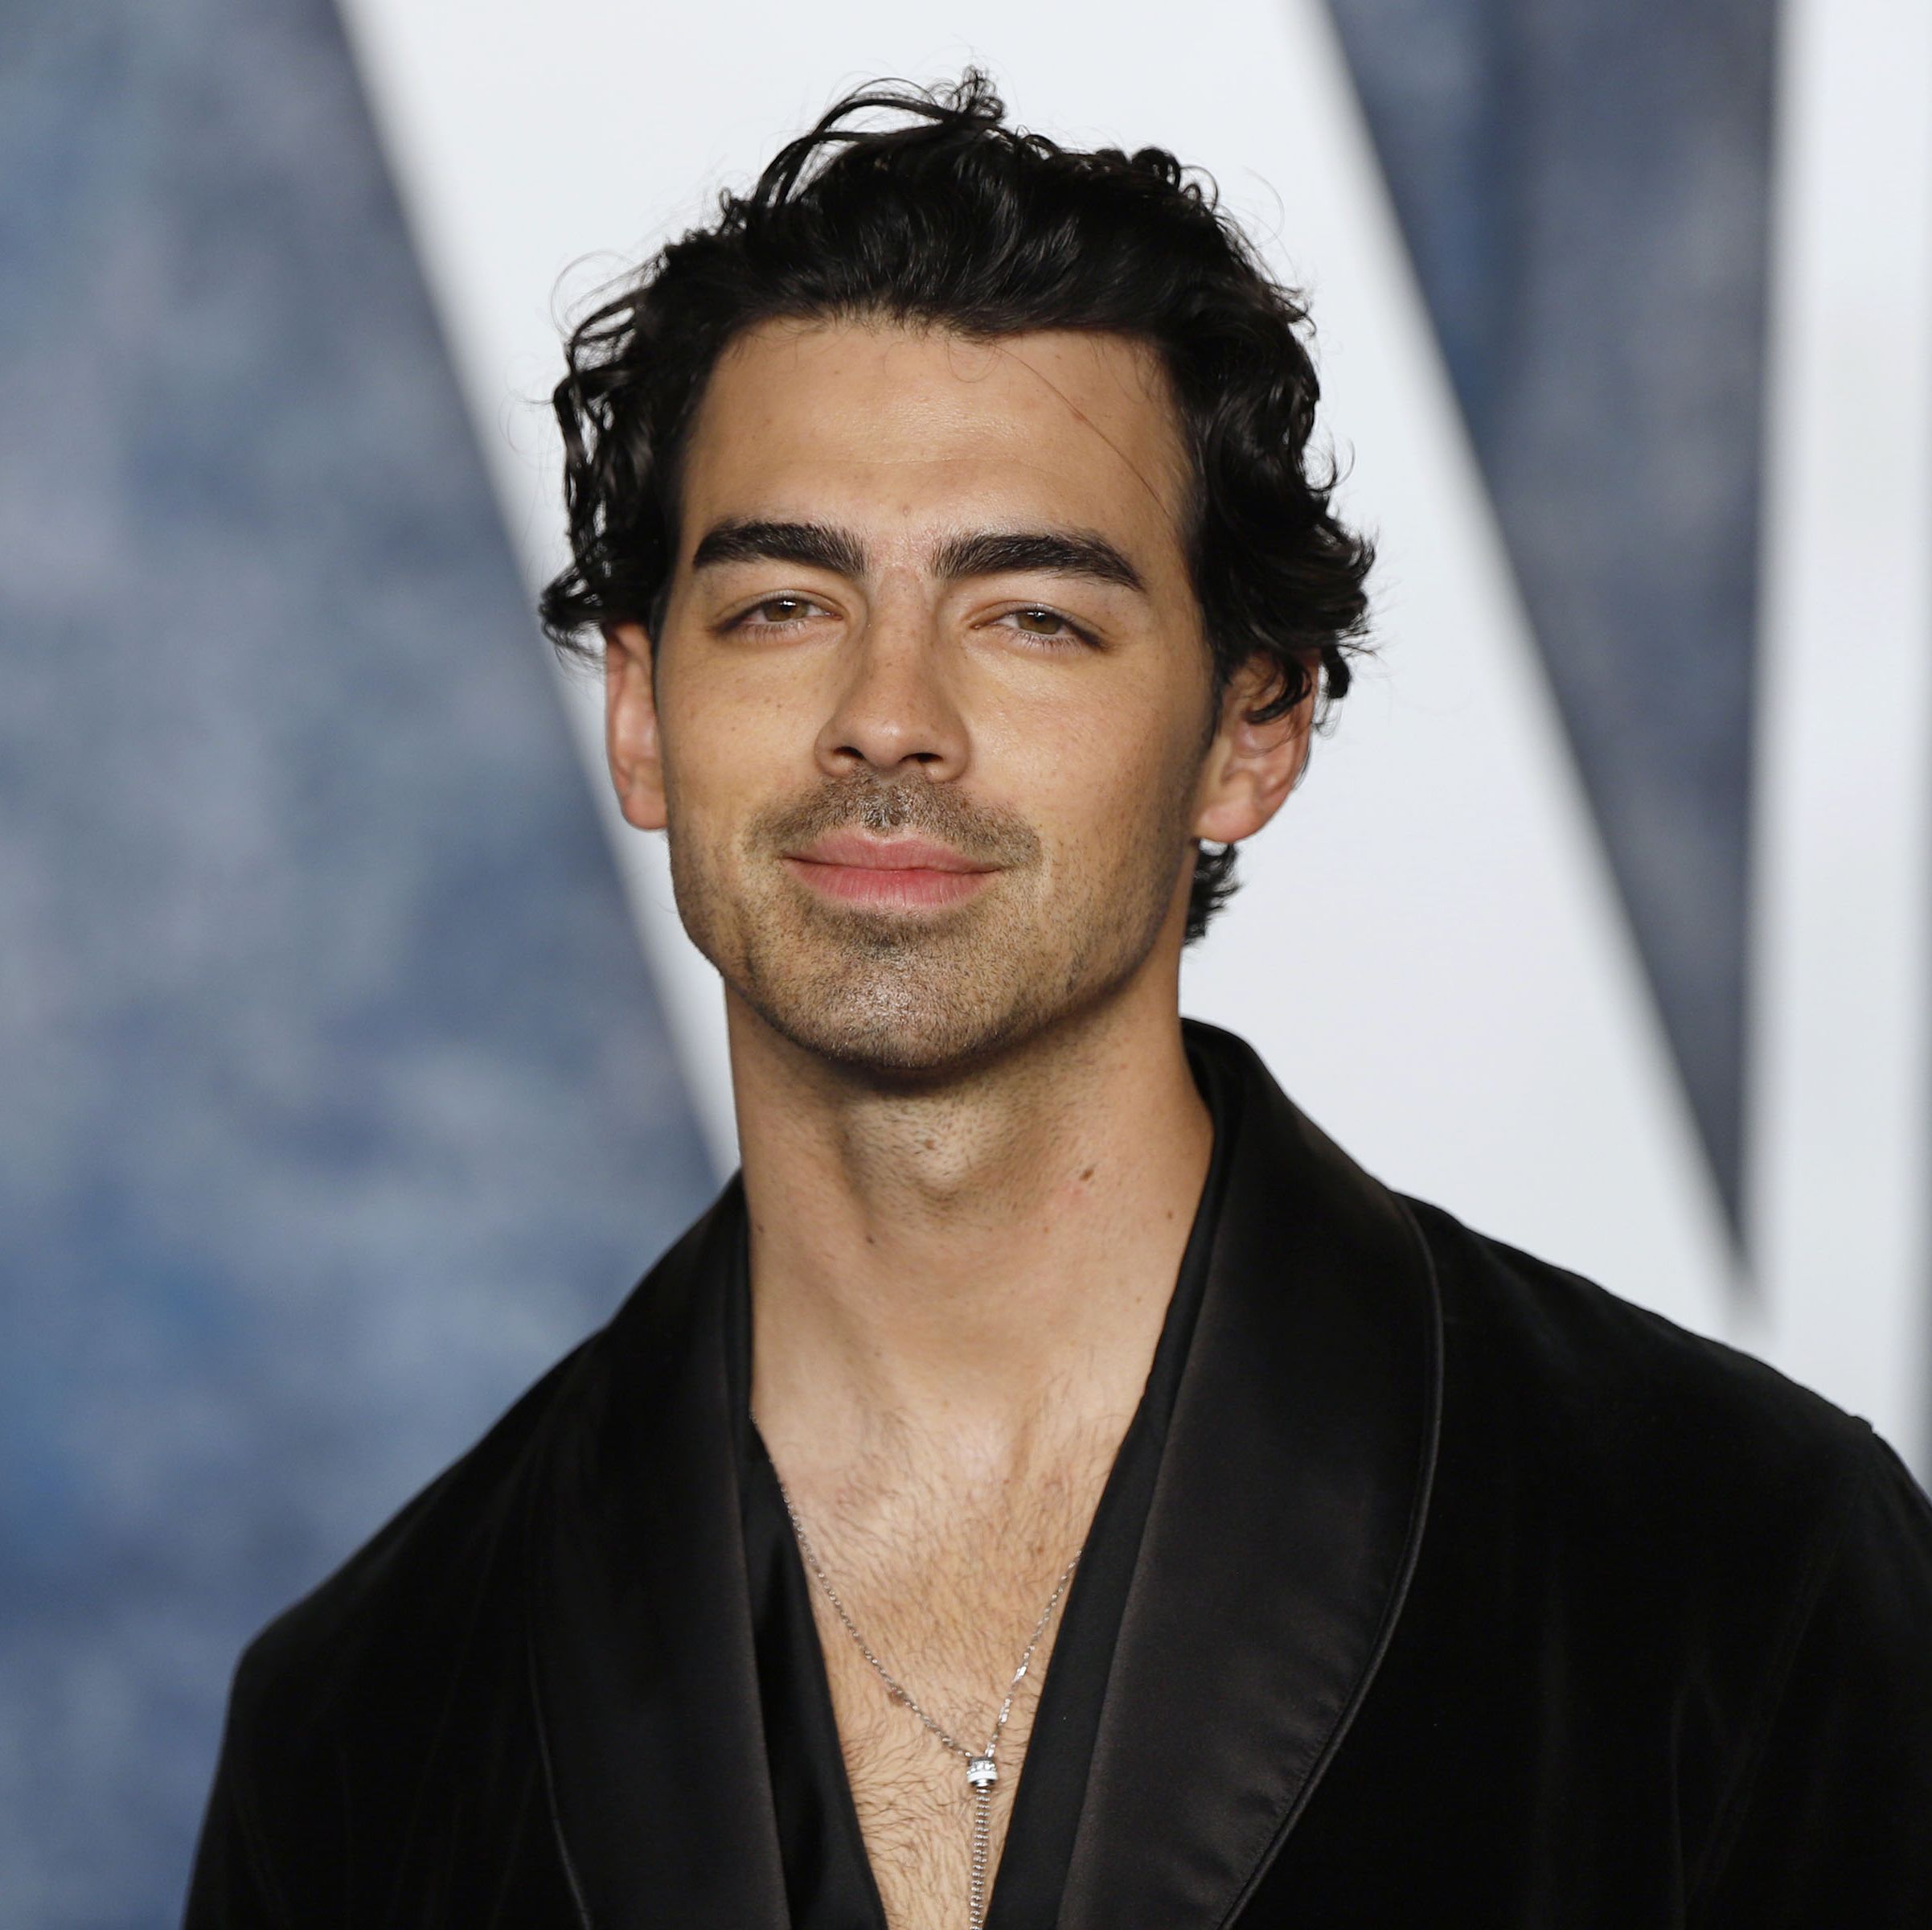 Joe Jonas Breaks Instagram Silence With a Post Prominently Featuring His Wedding Ring